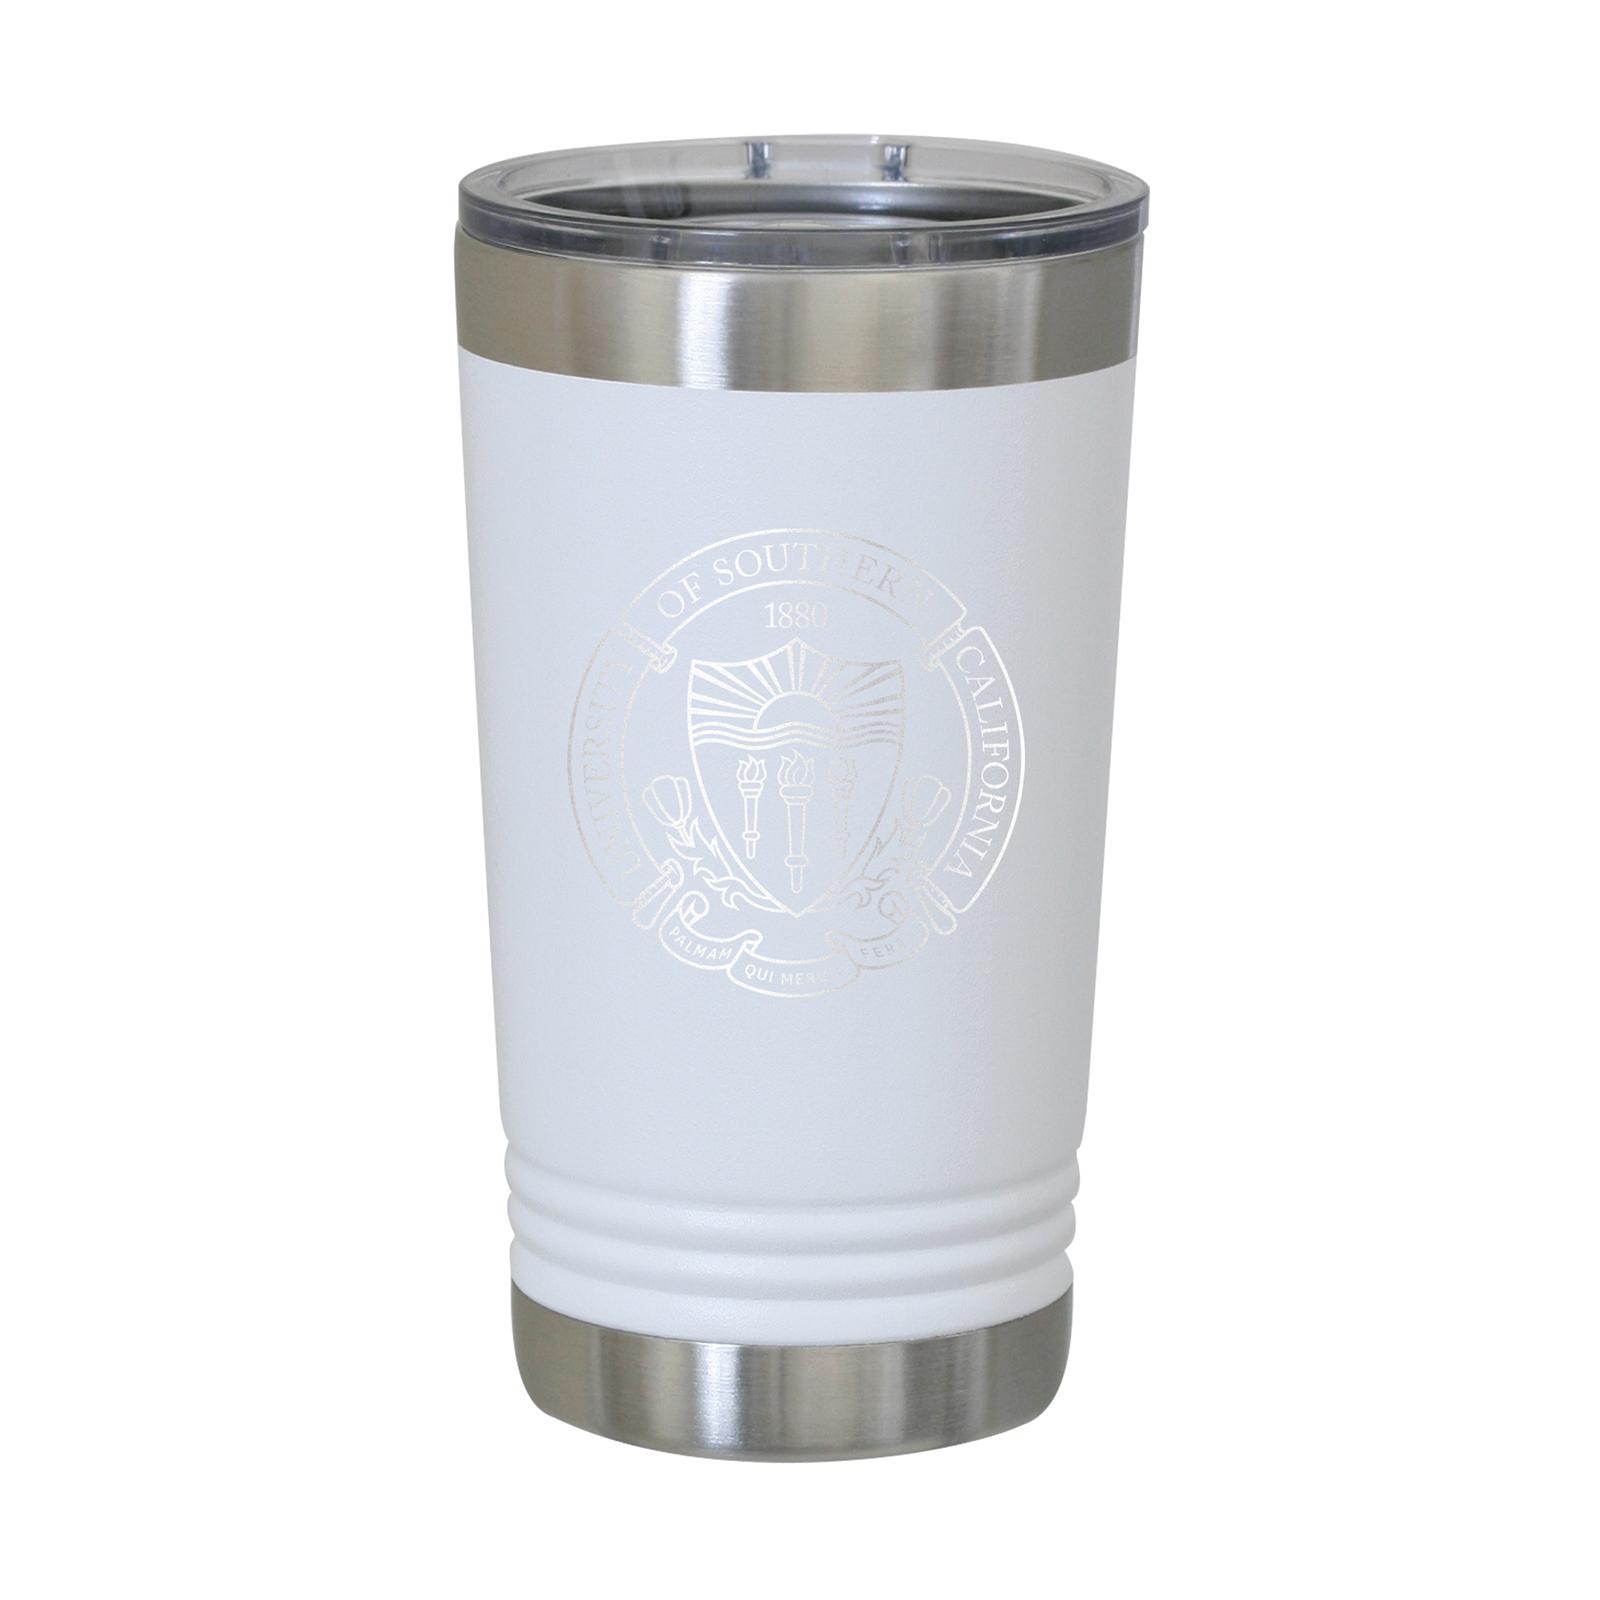 Seal University of Southern California Insulated Polar Camel Pint White by Spirit image01